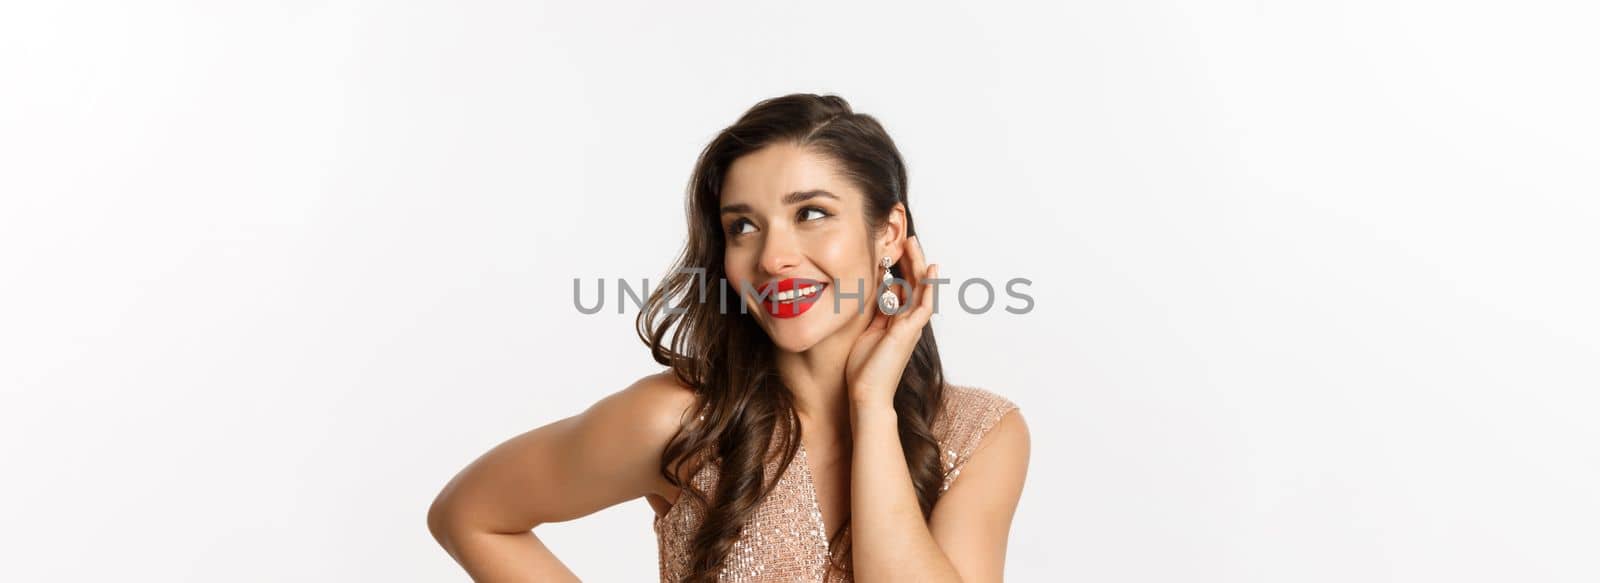 Concept of New Year celebration and winter holidays. Close up of beautiful woman dressed for party, blushing and smiling satisfied, showing her makeup, white background.